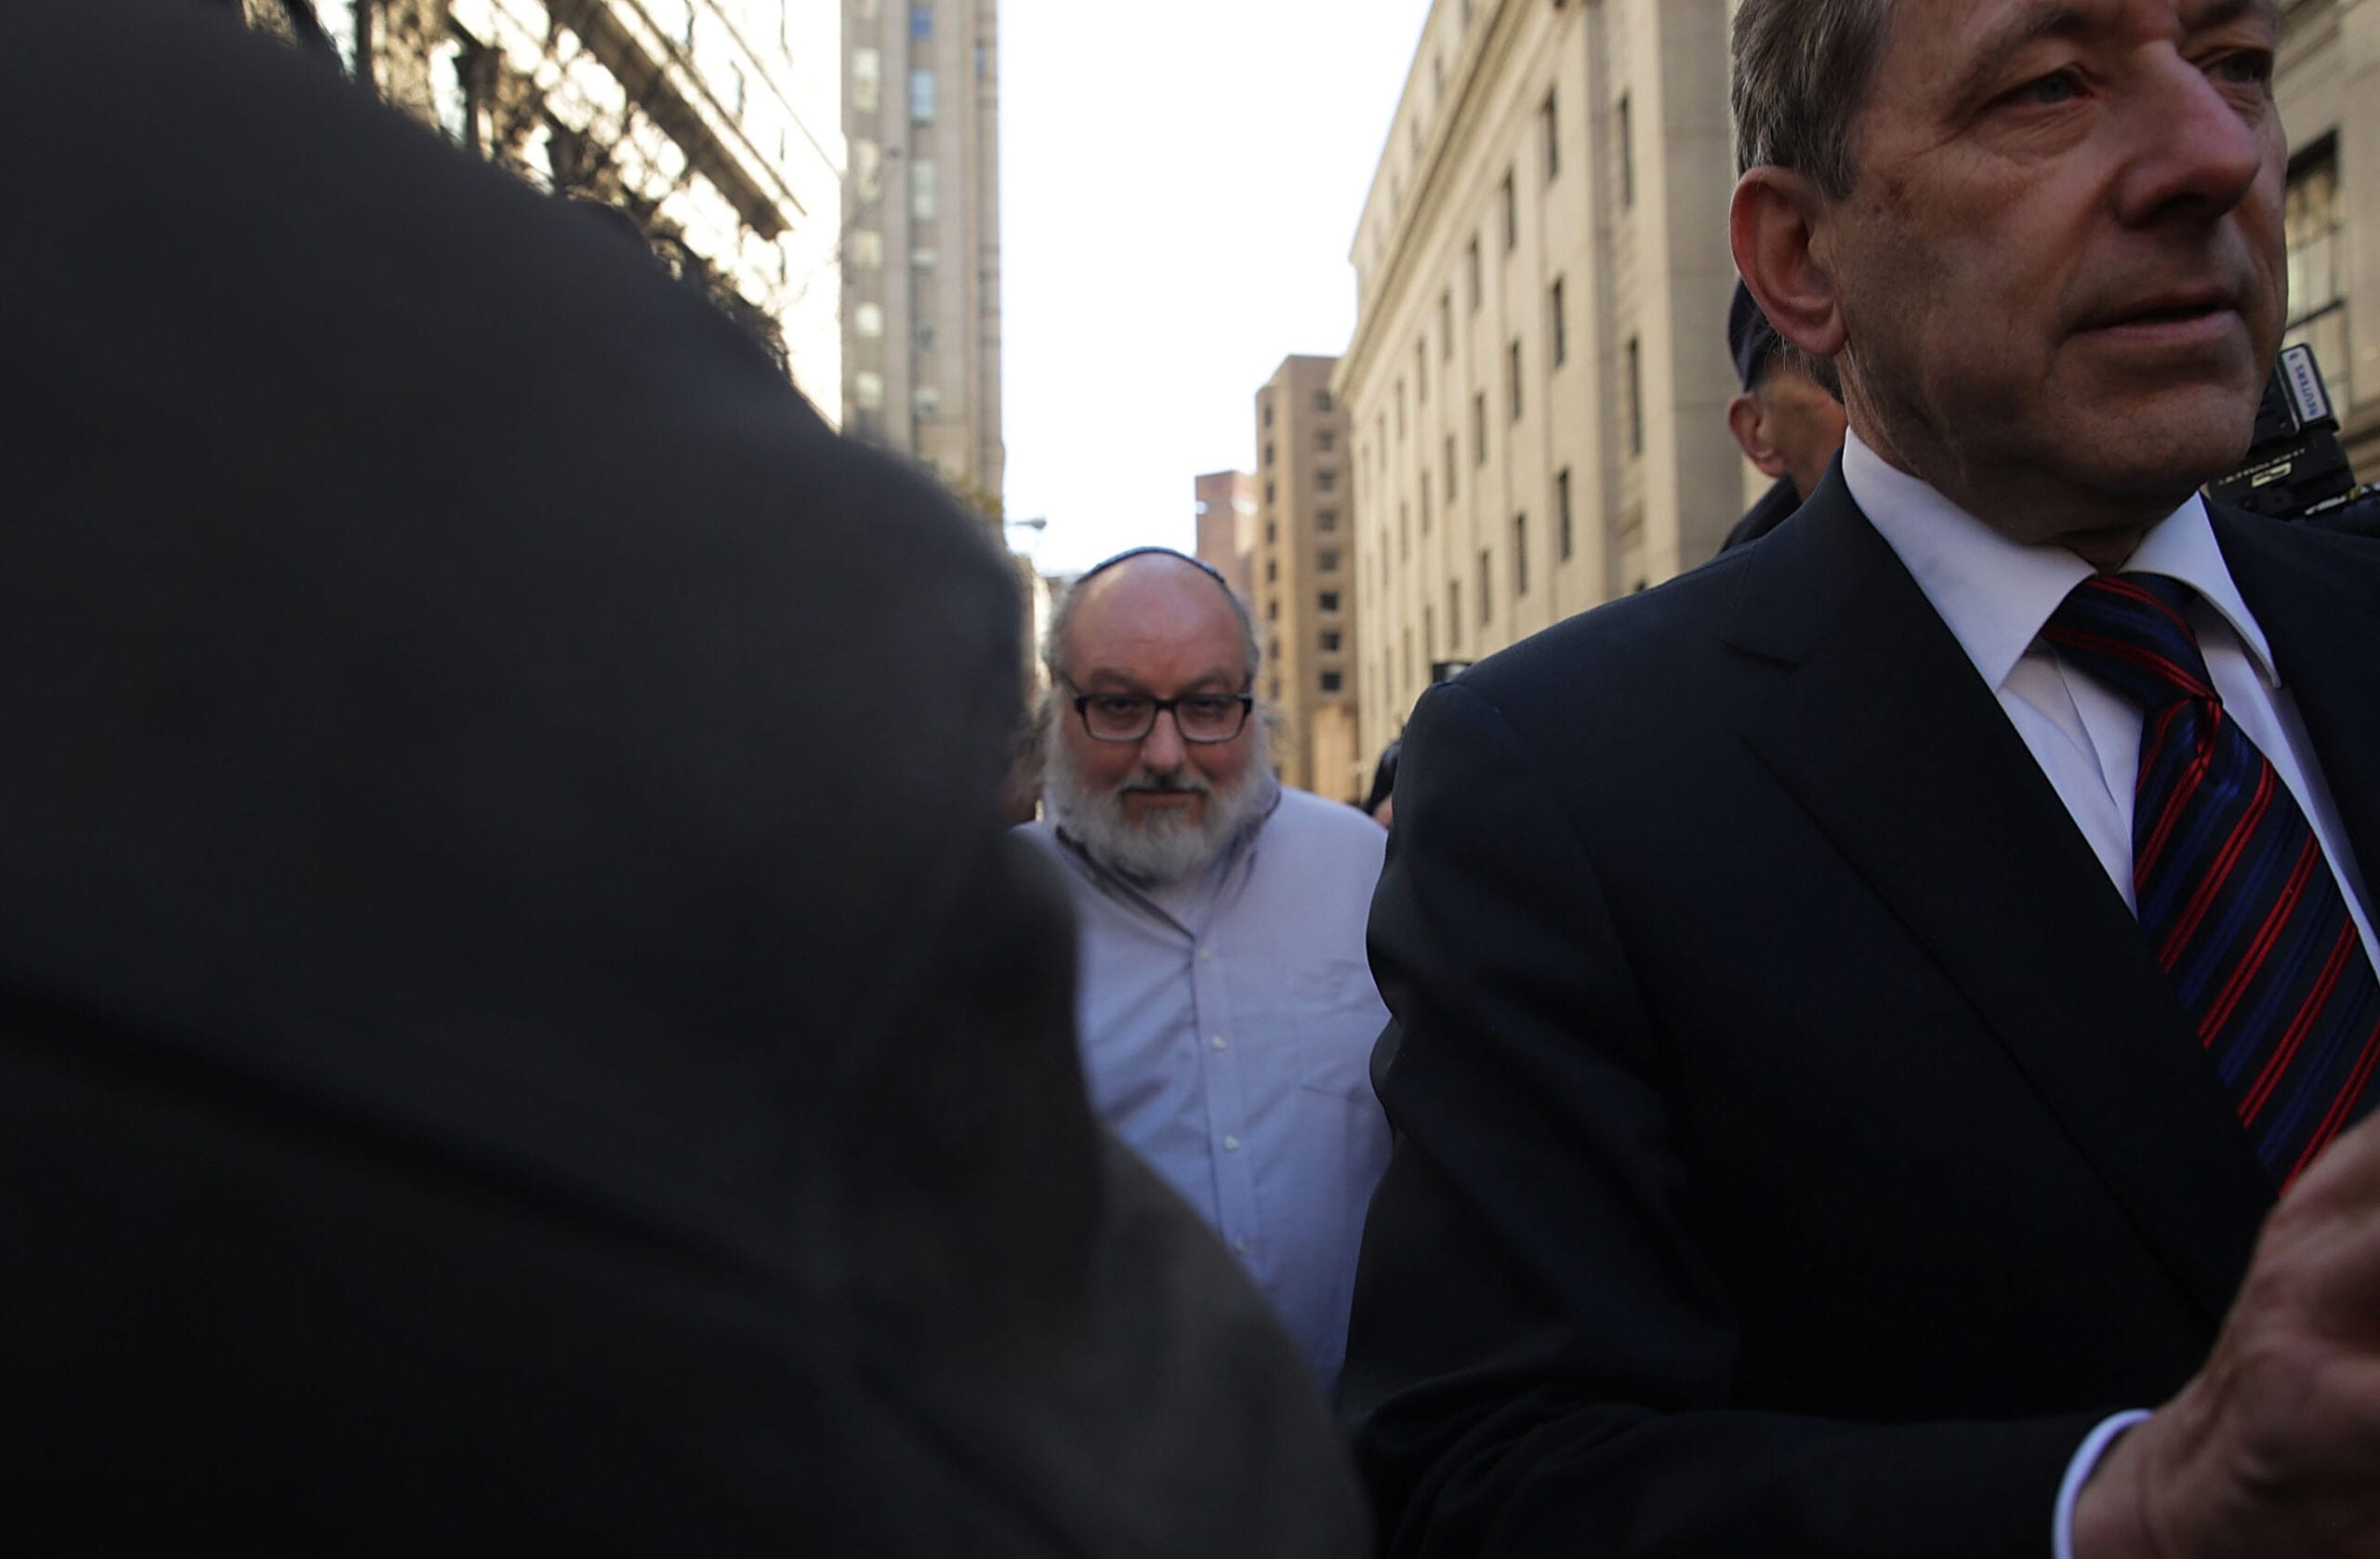 Jonathan Pollard, the American convicted of spying for Israel, leaves a New York court house following his release from prison early on Friday after 30 years on November 20, 2015 in New York, New York [Spencer Platt/Getty Images]